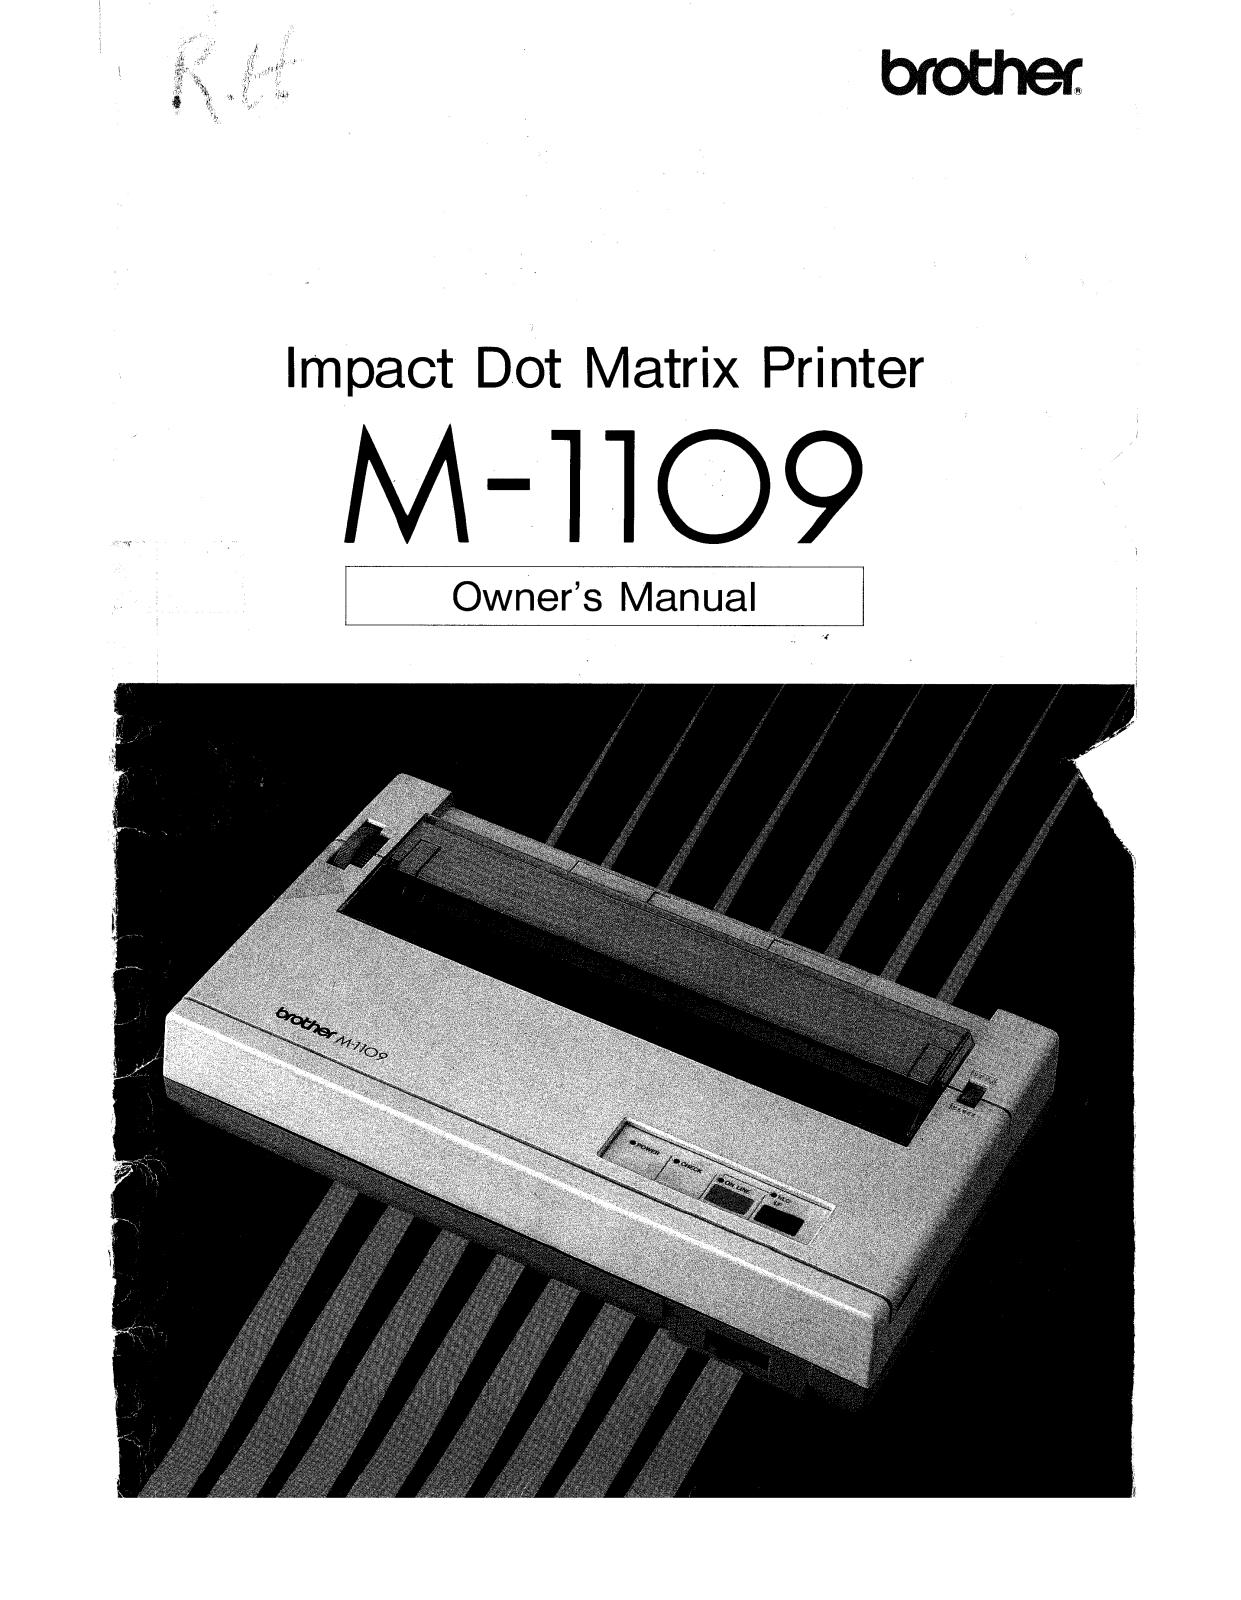 Brother M-1109 Owner's Manual